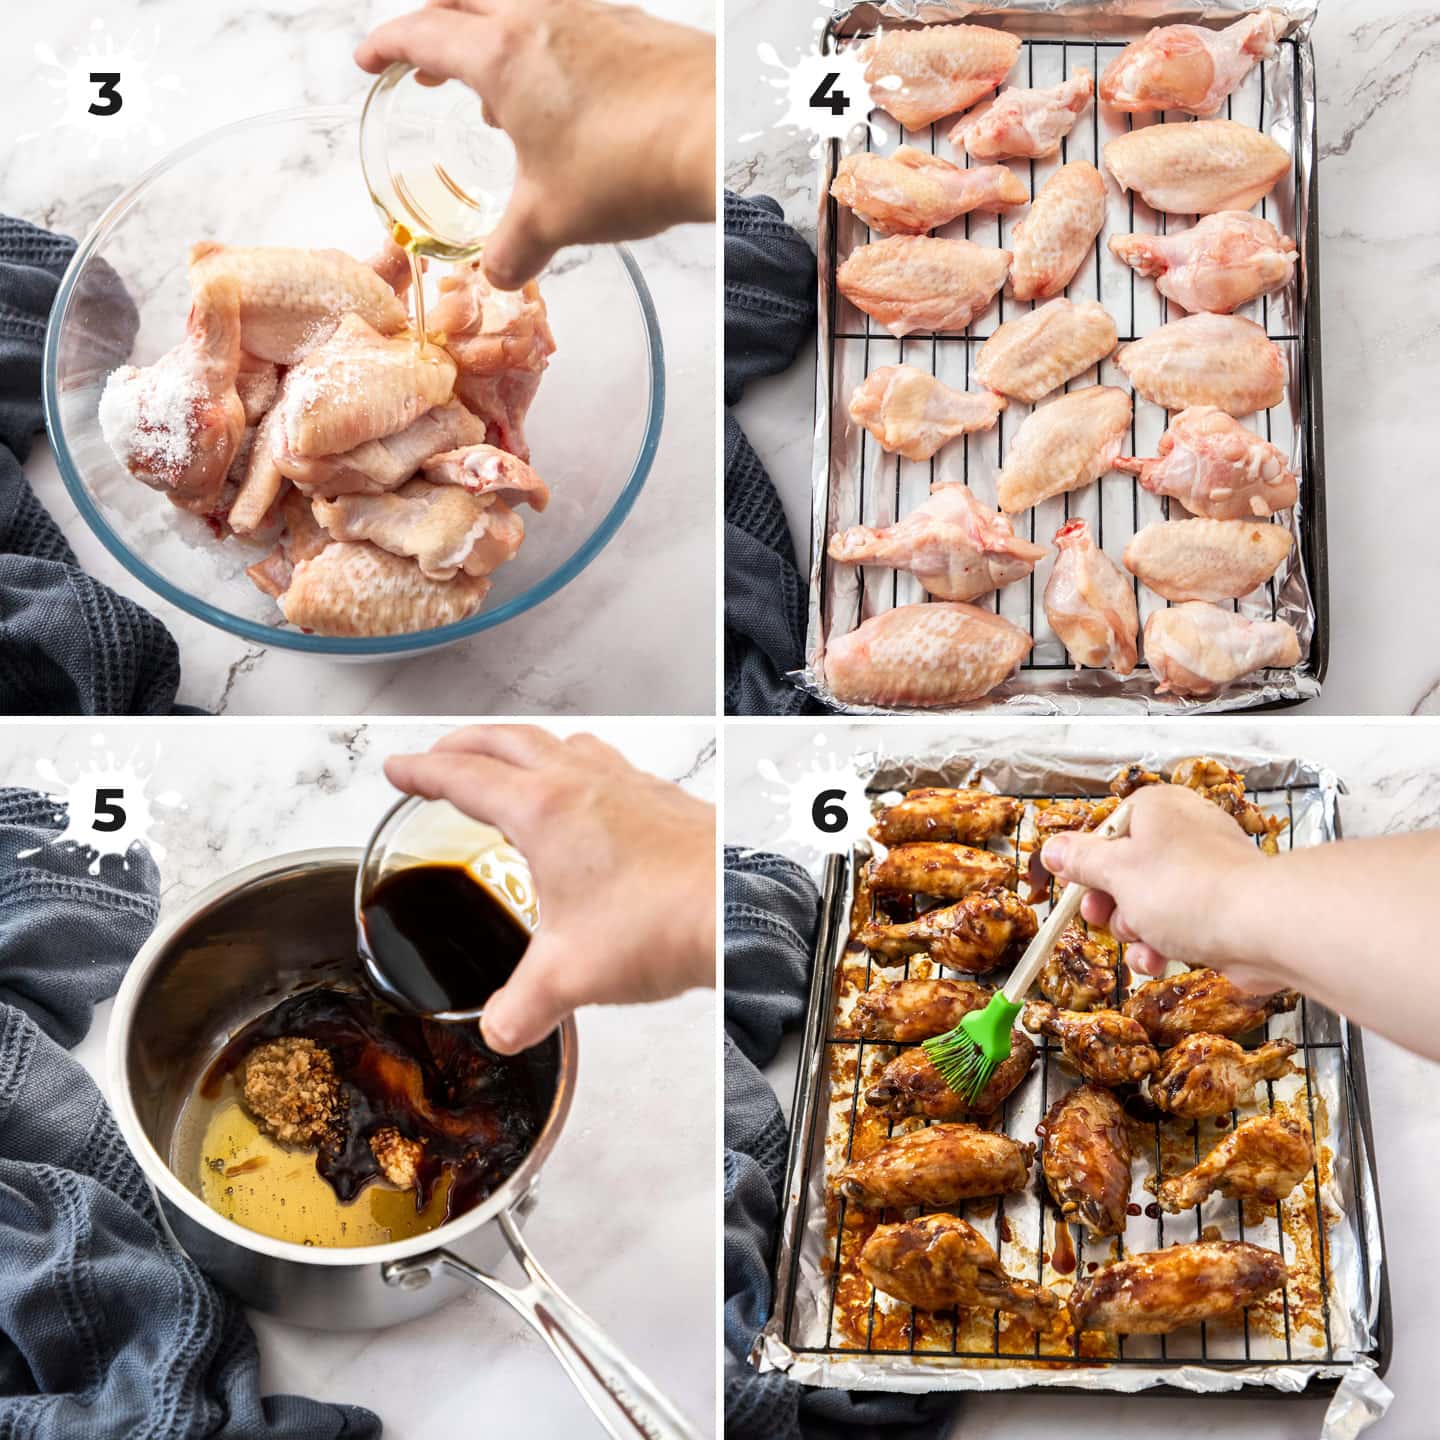 4 images showing the making of sticky chicken wings.